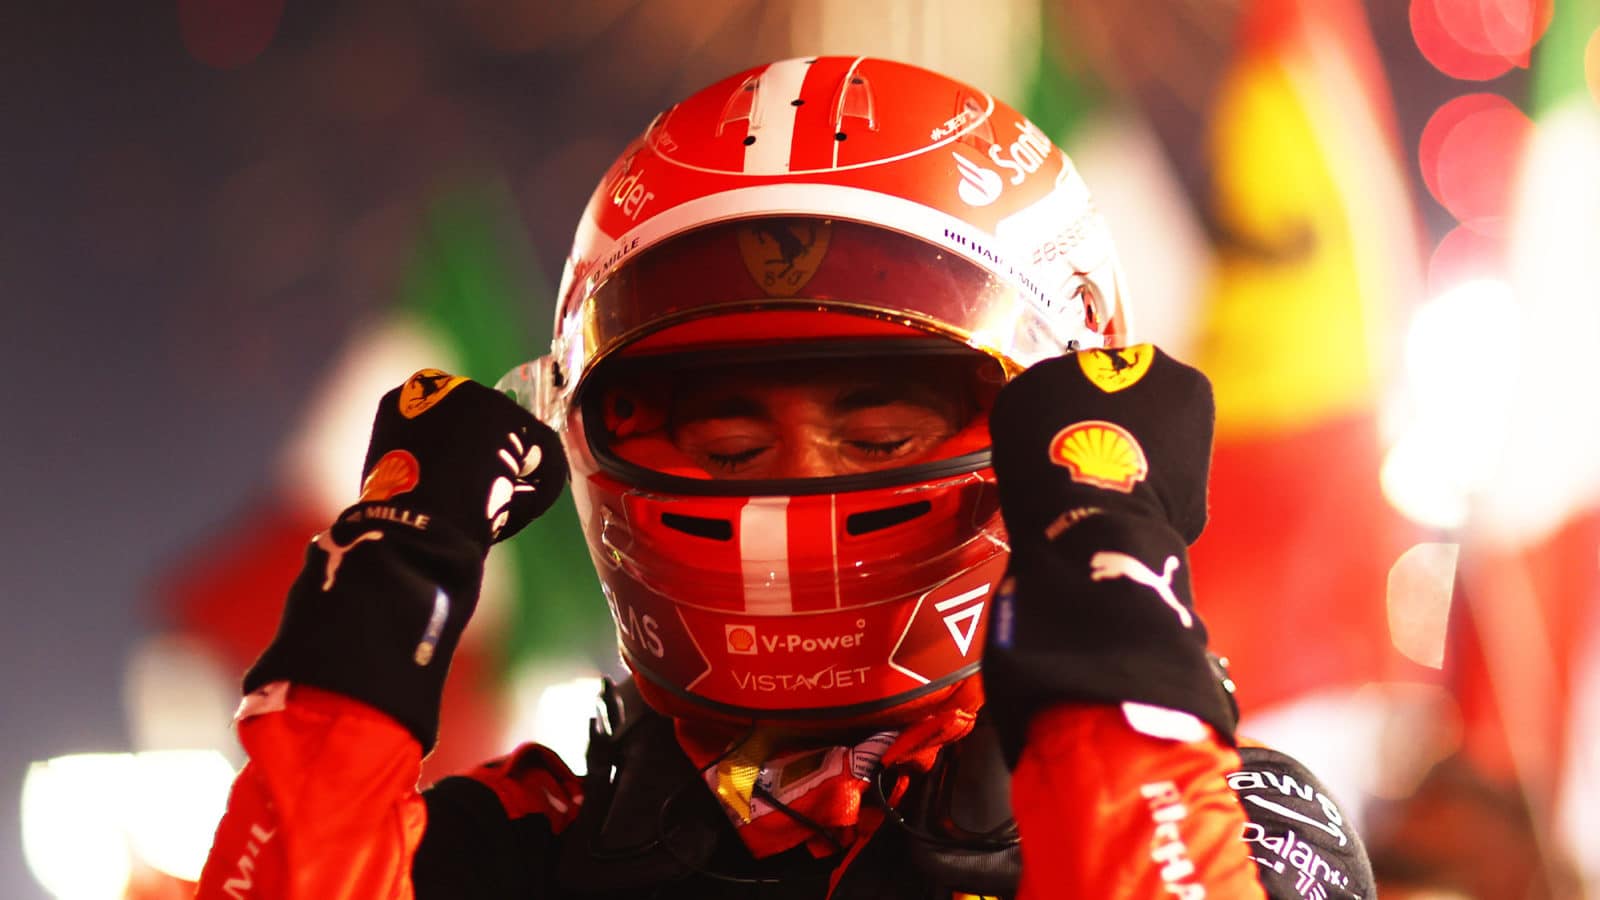 Charles Leclerc throws up his arms after winning the 2022 F1 Bahrain Grand Prix